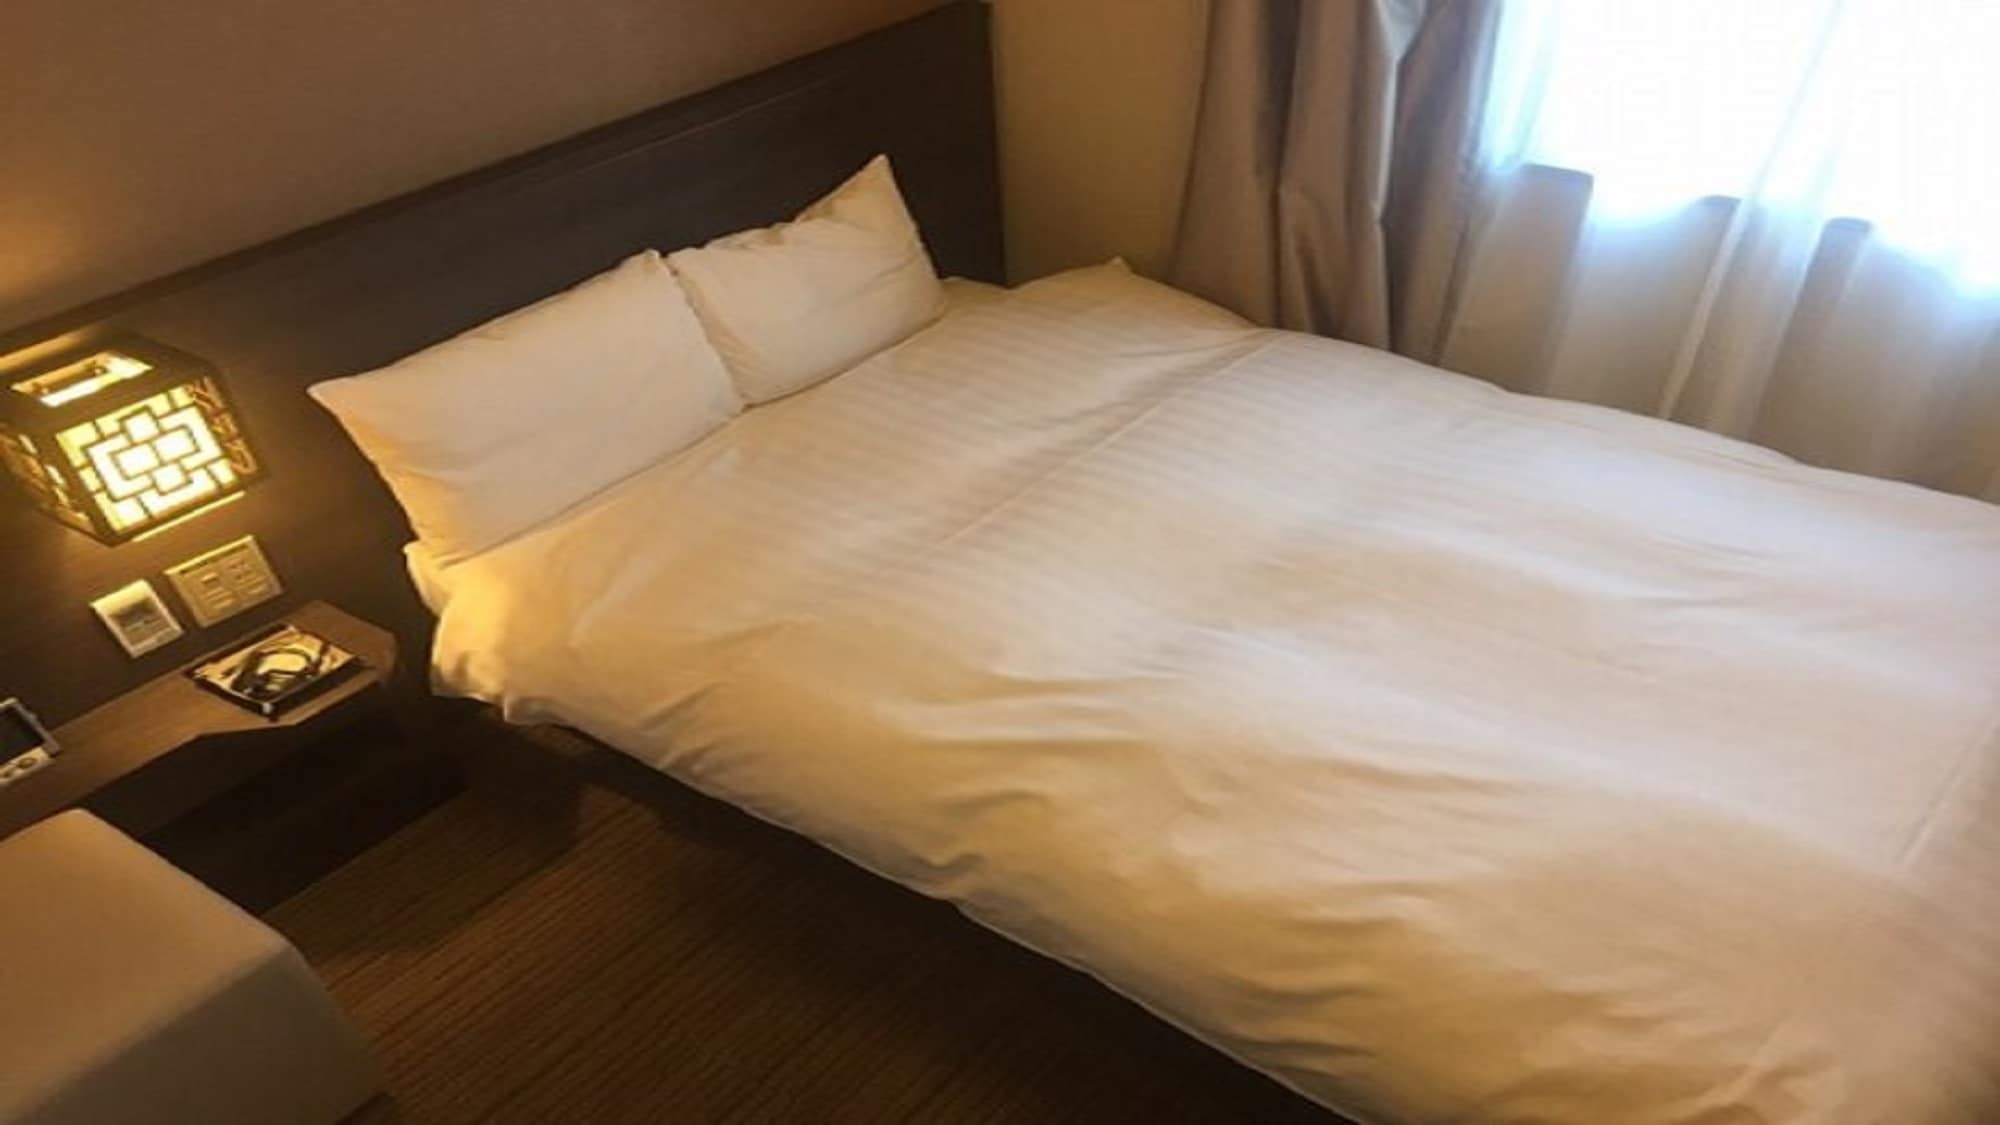 ■ Semi-double room 14.0㎡ Bed size: 120cm & times; 195cm